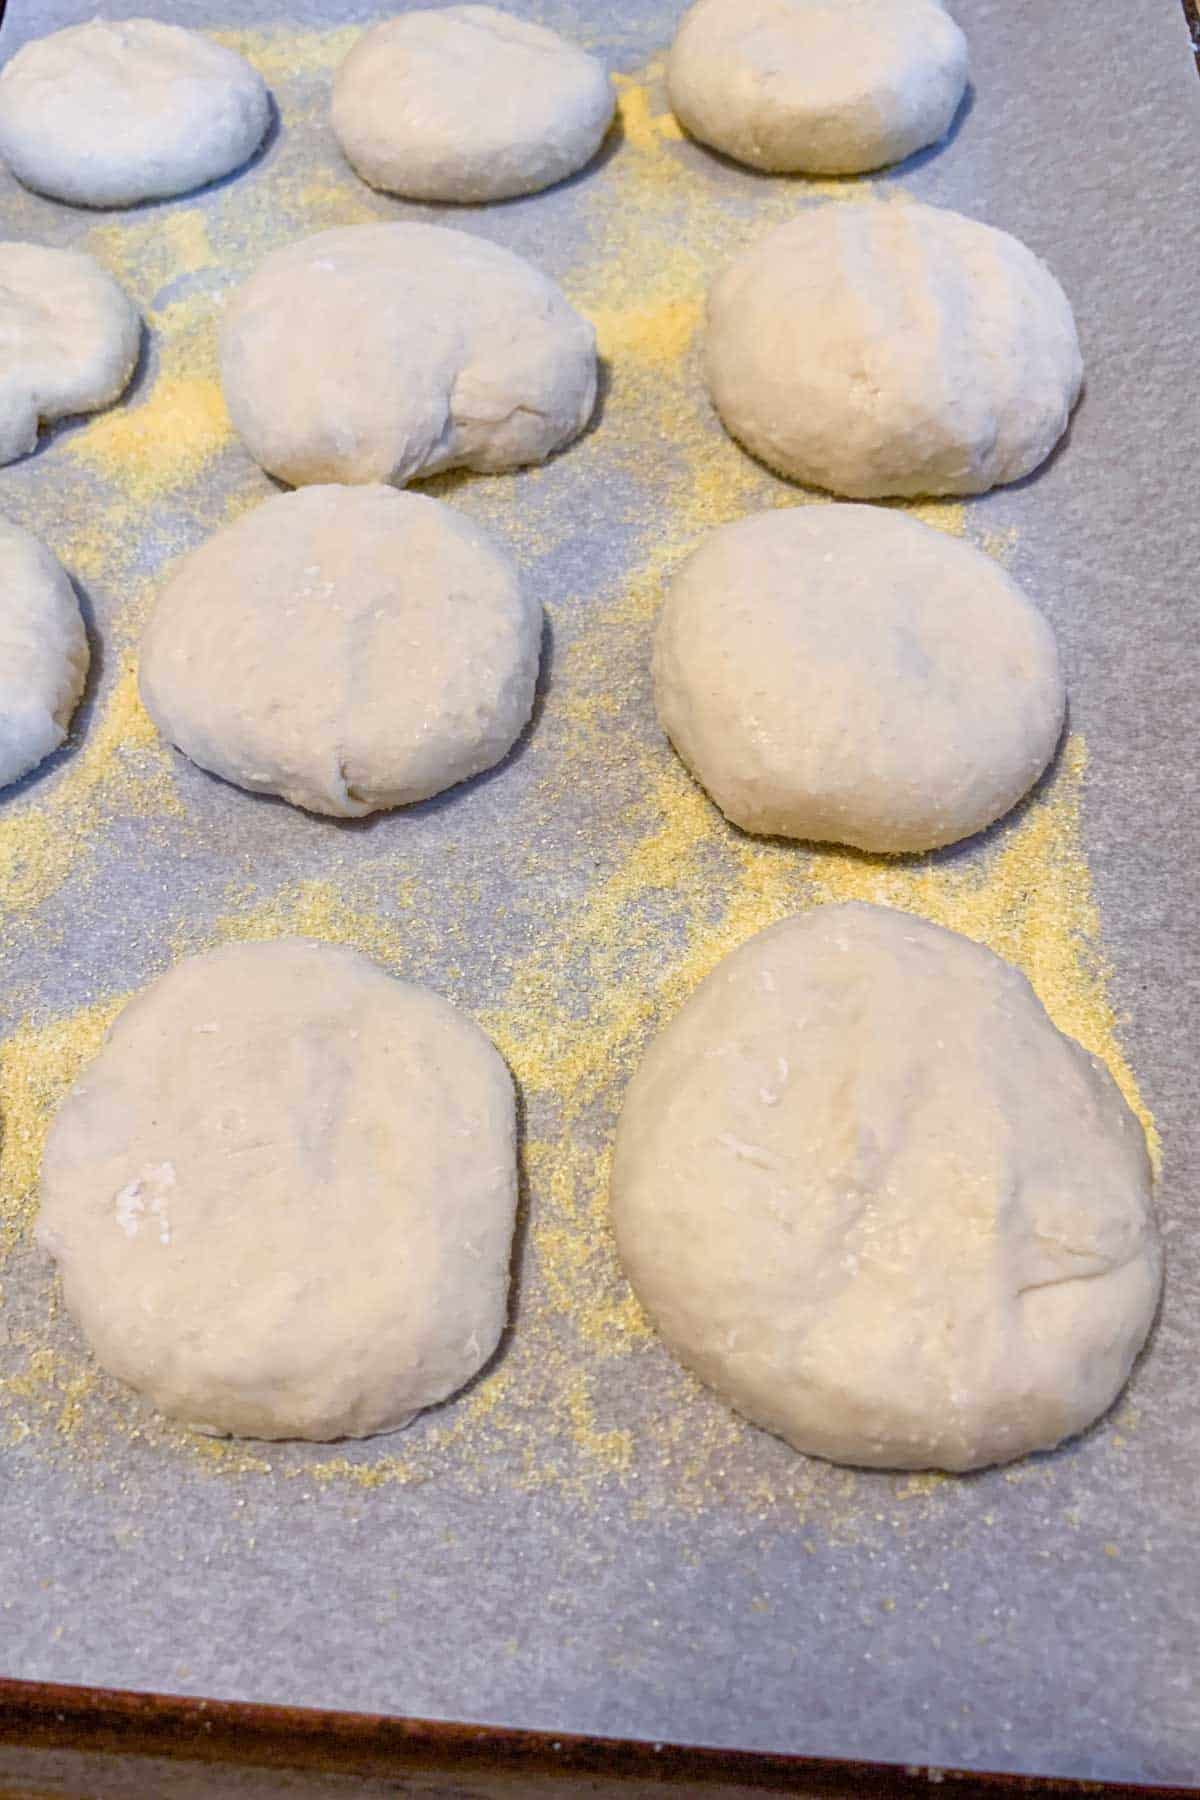 English muffin dough balls resting on a baking sheet covered in cornmeal.